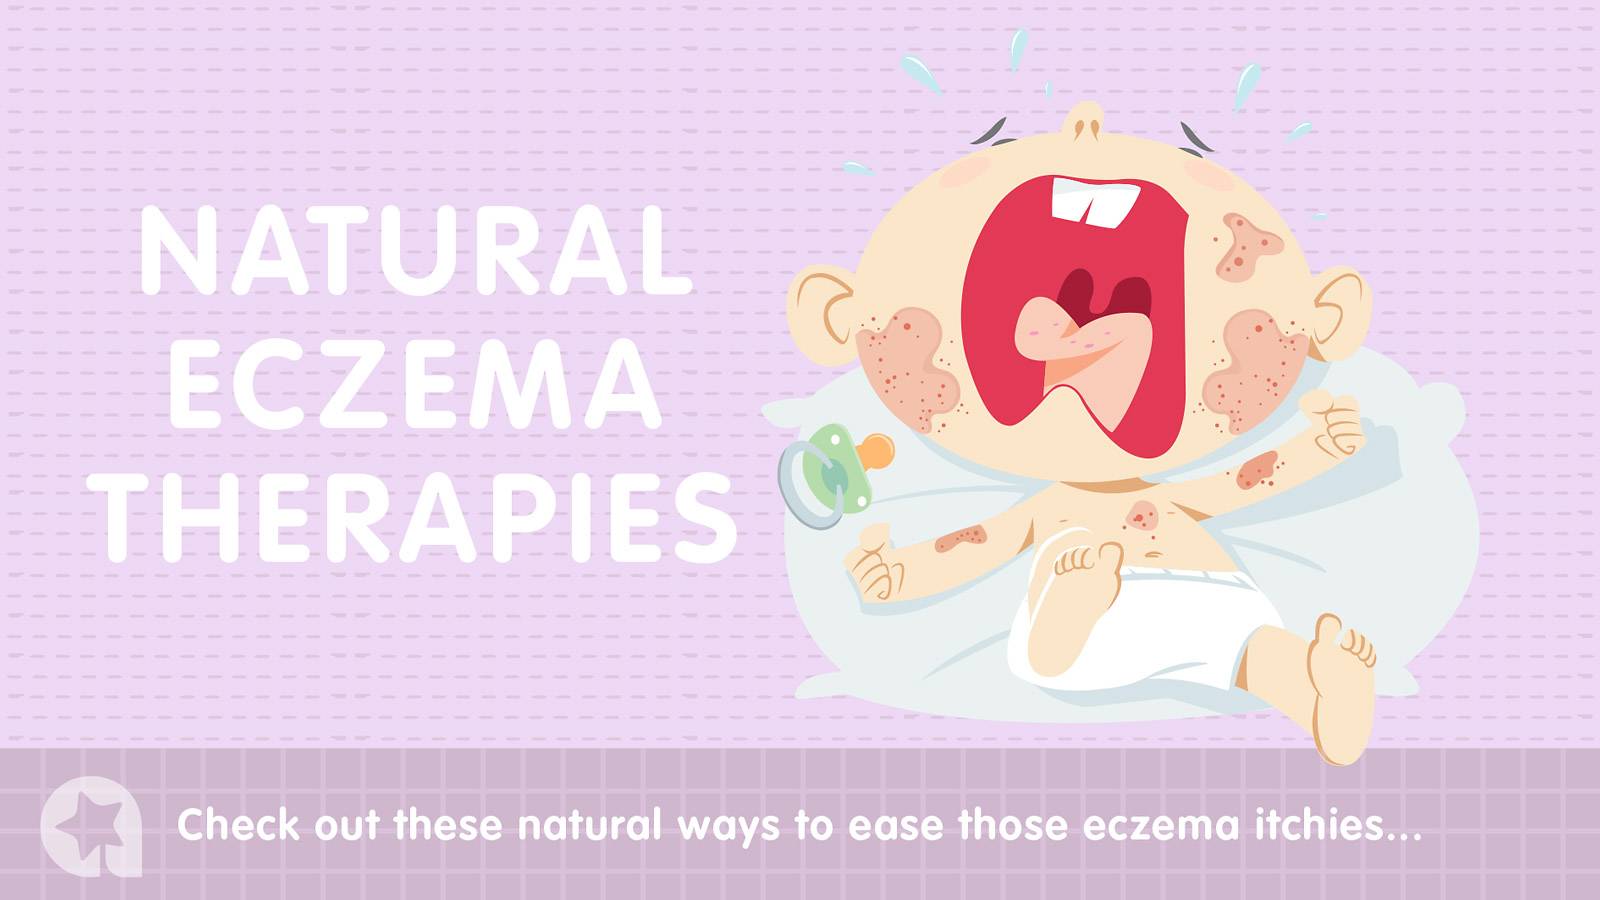 Babies--7-natural-eczema-remedies-to-try-main